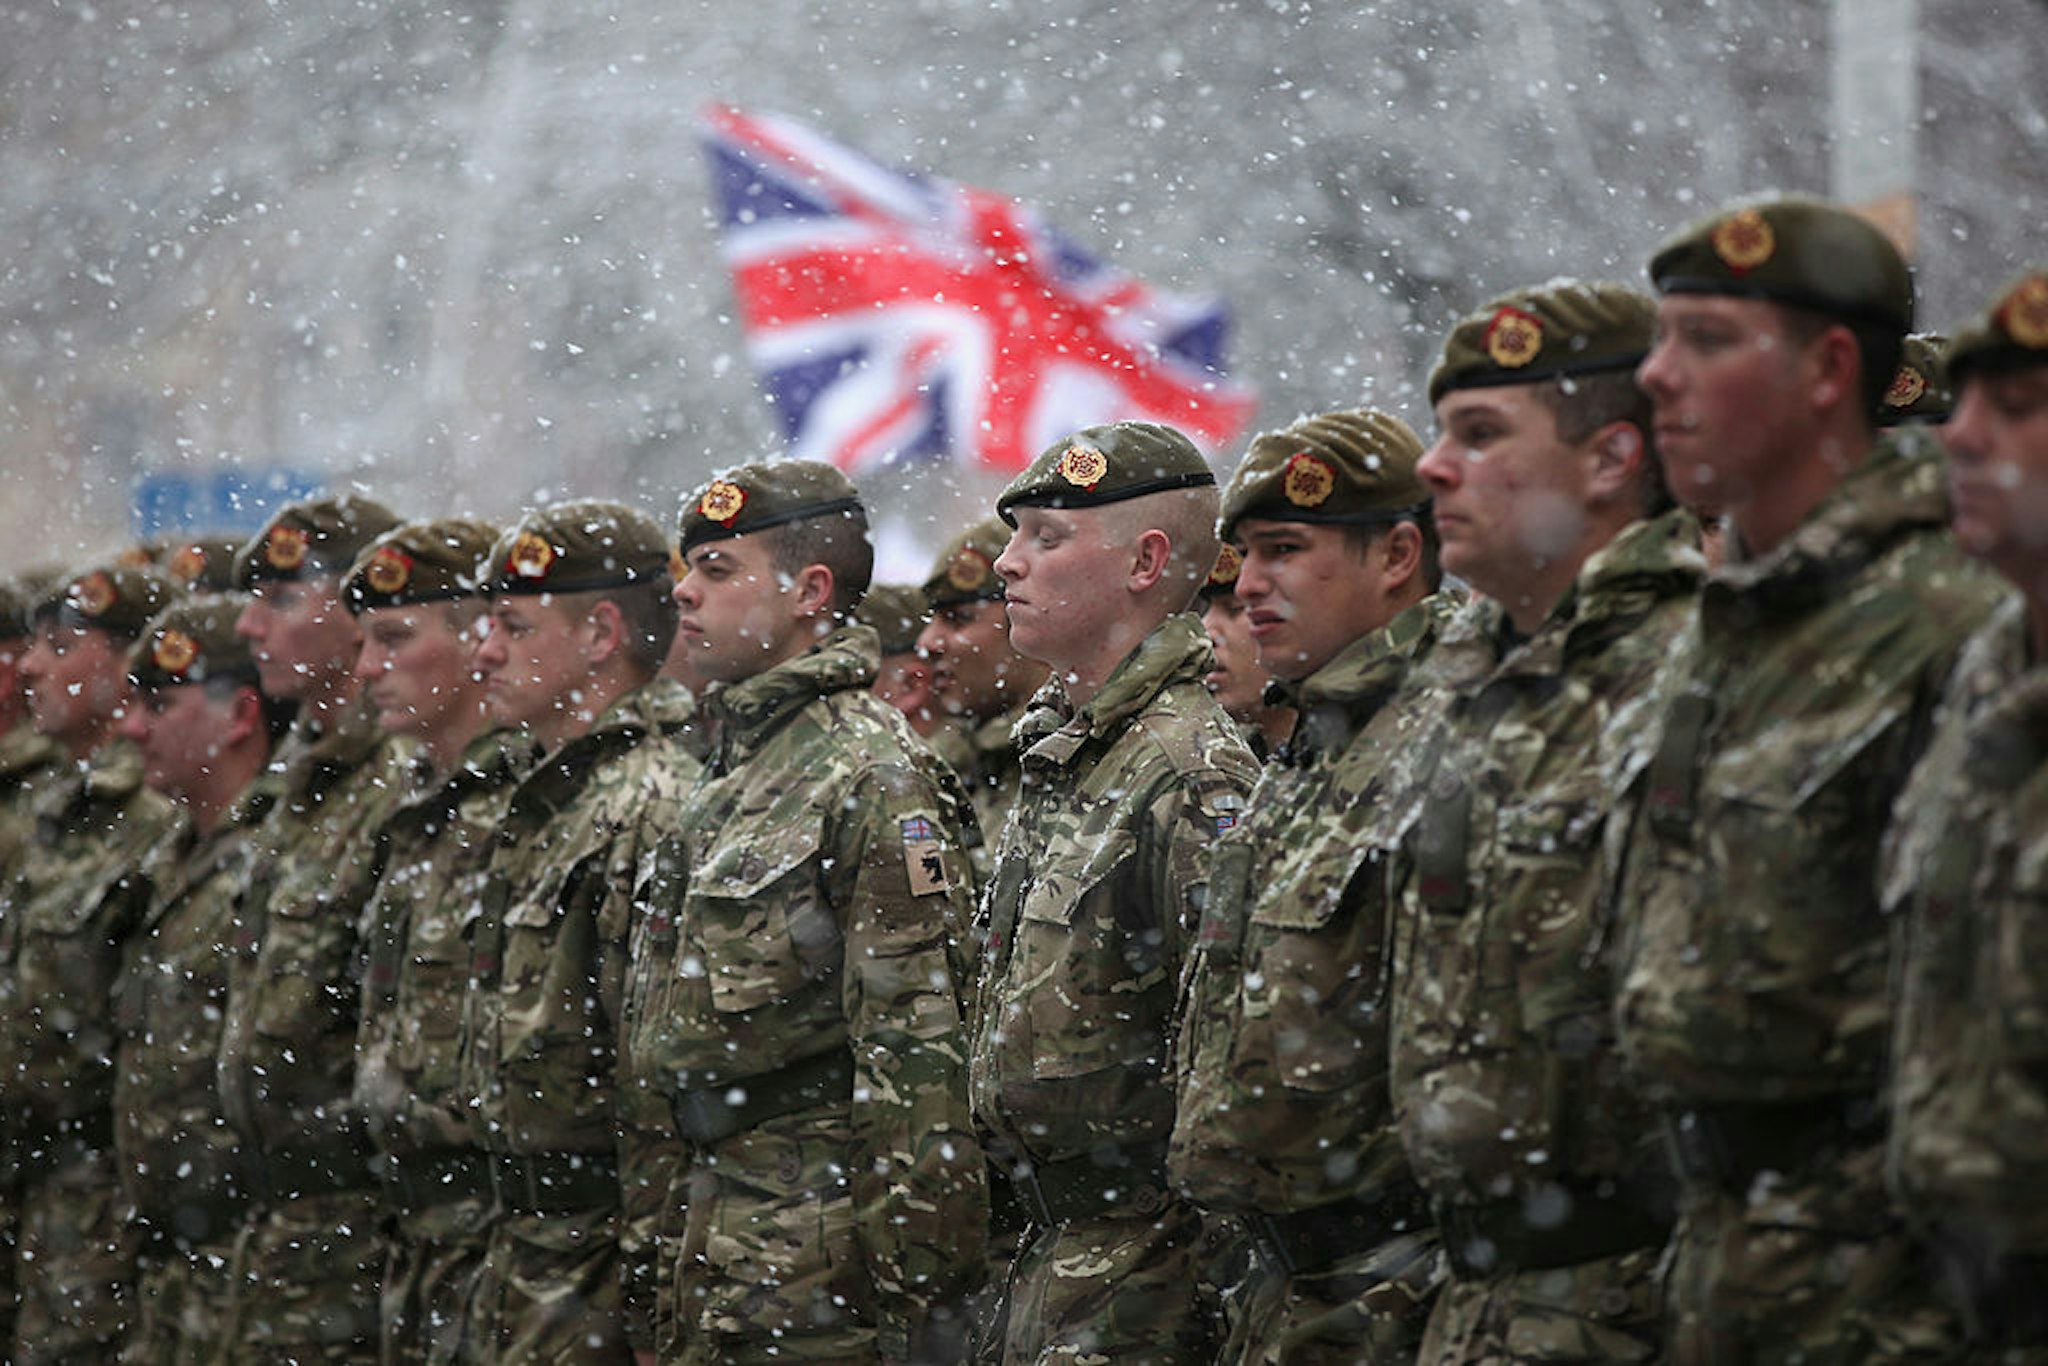 BLACKBURN, ENGLAND - DECEMBER 01: Soldiers of The 1st Battalion Duke of Lancaster's Regiment brave the snow as they march through the streets of Blackburn following a six-month tour of duty in Afghanistan on December 1, 2010 in Blackburn, England. The 120 soldiers exercised their right to the freedom of the city by taking part in a thanksgiving service at Blackburn Cathedral and parading through the streets.